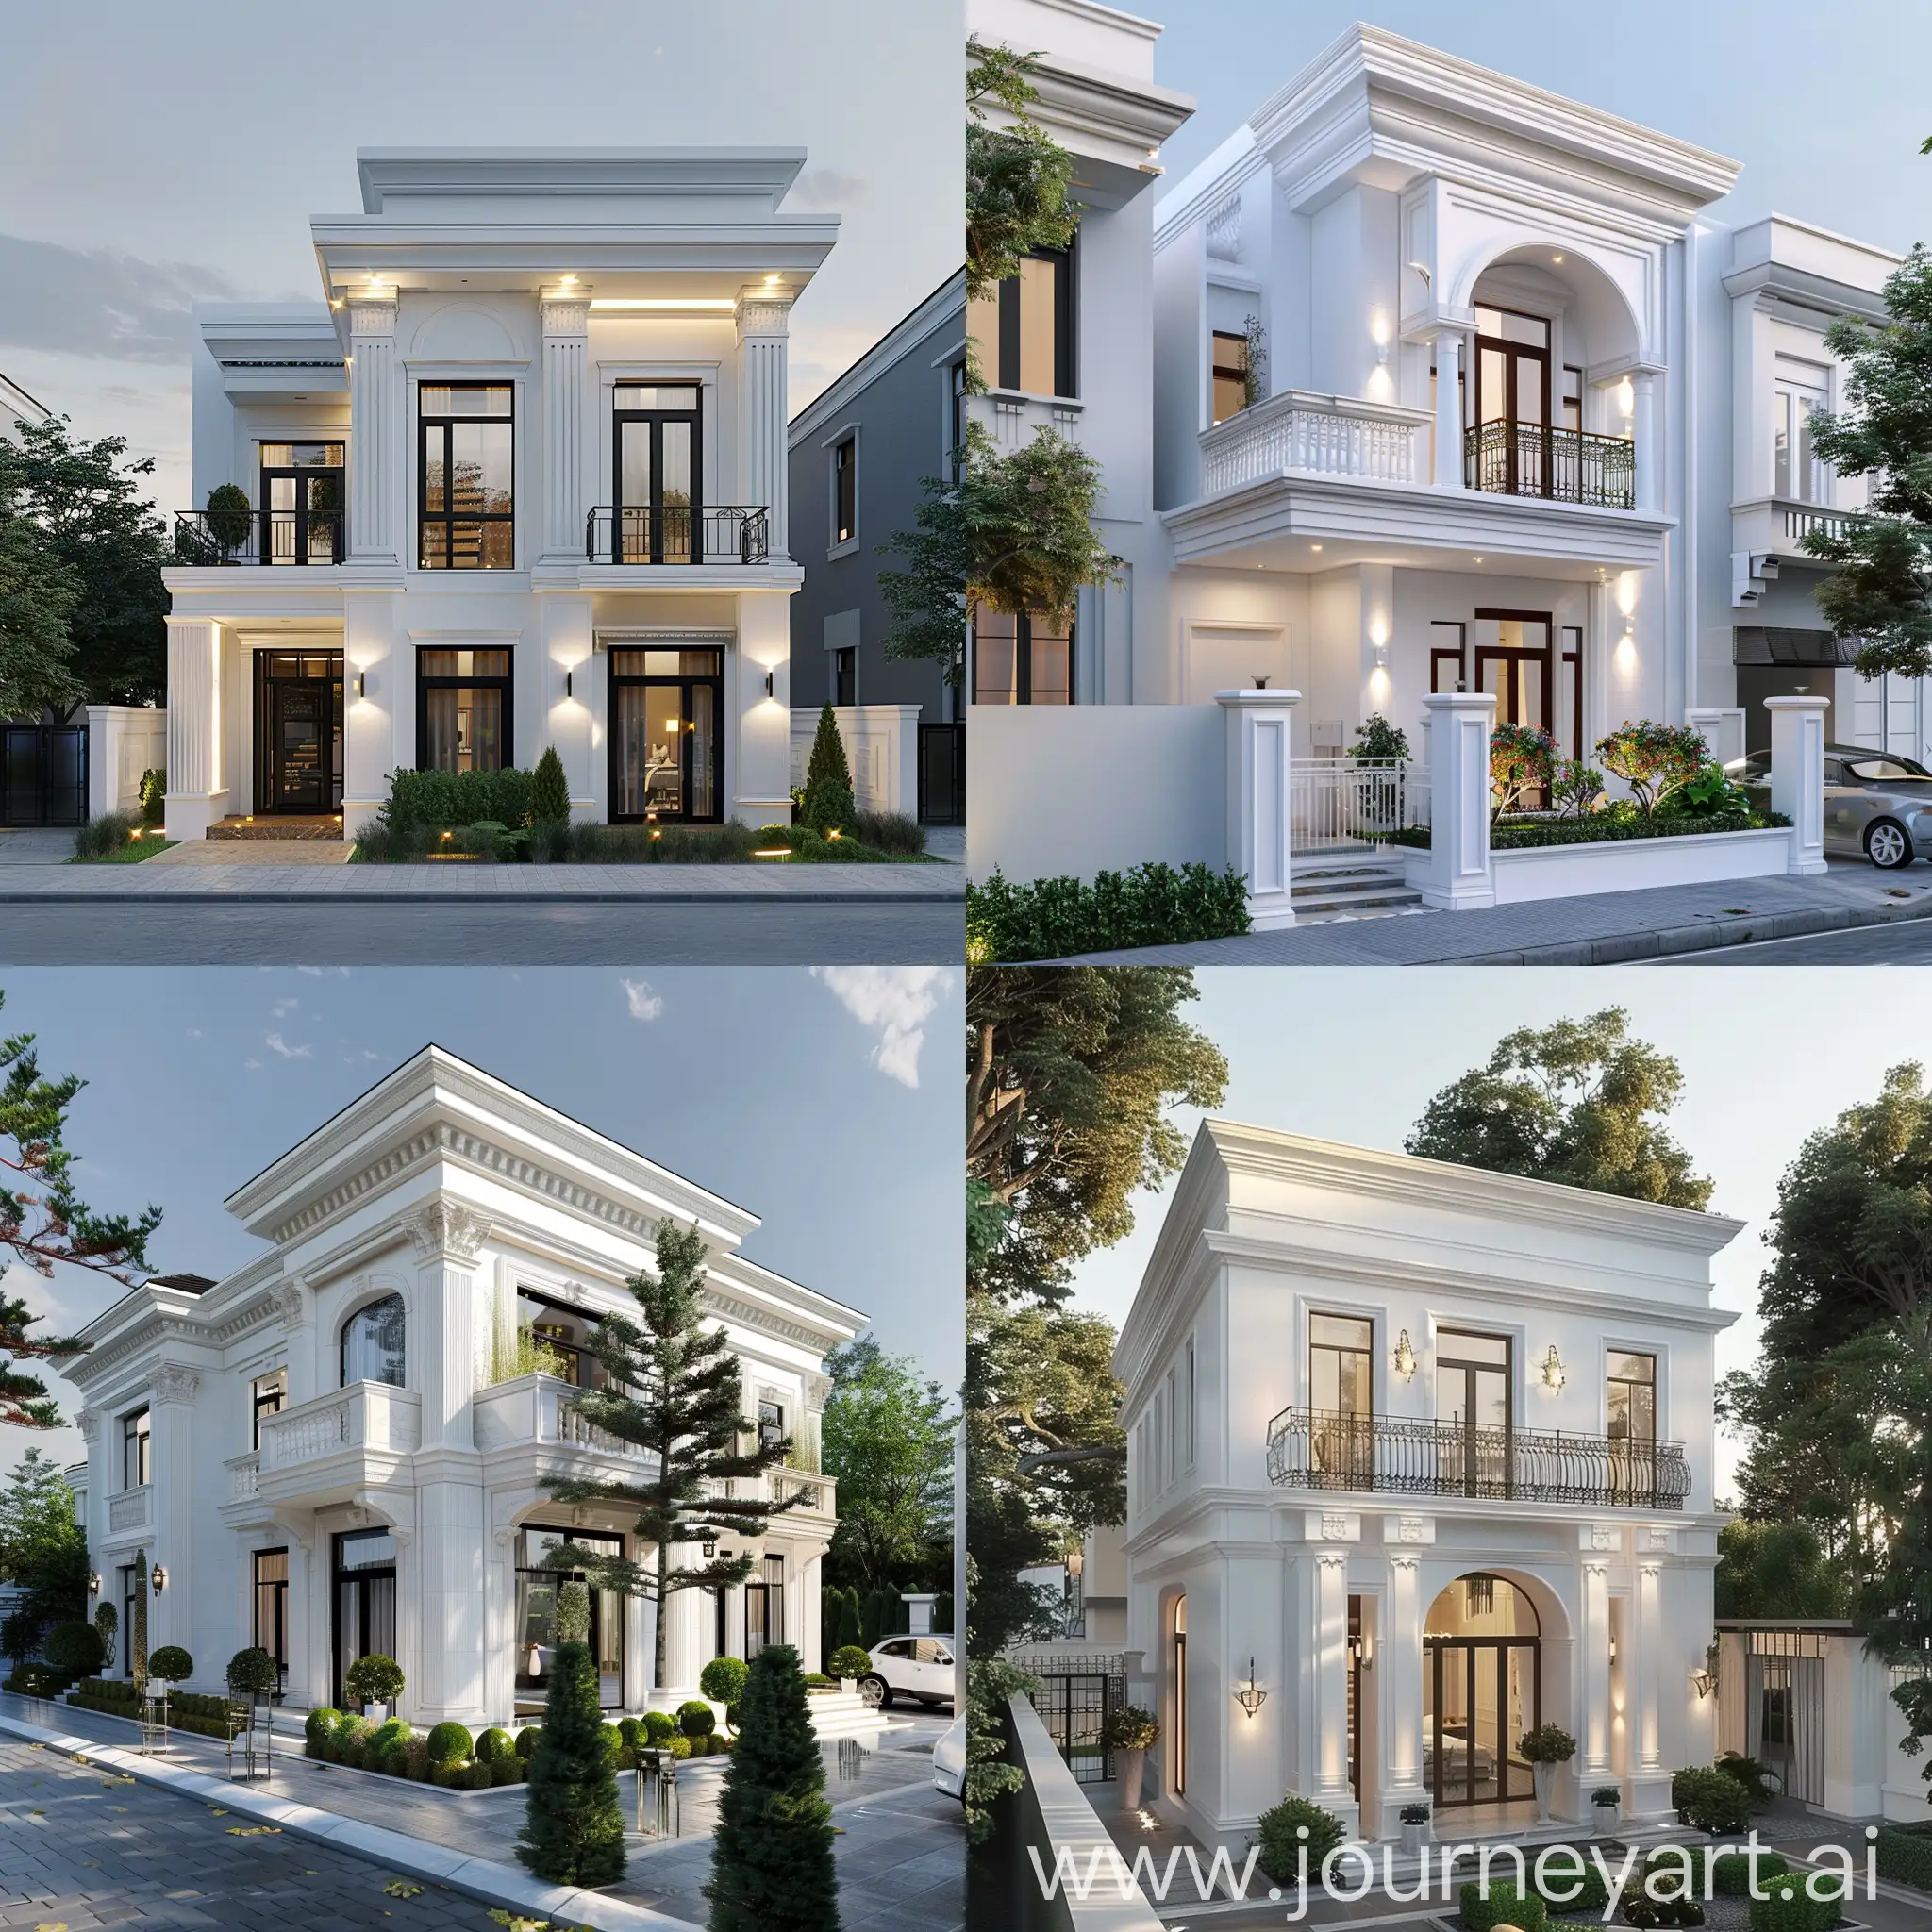 Generate designs of an ultra realistic two-story house, white and modern, not very large in size in city, in neoclassical architecture.